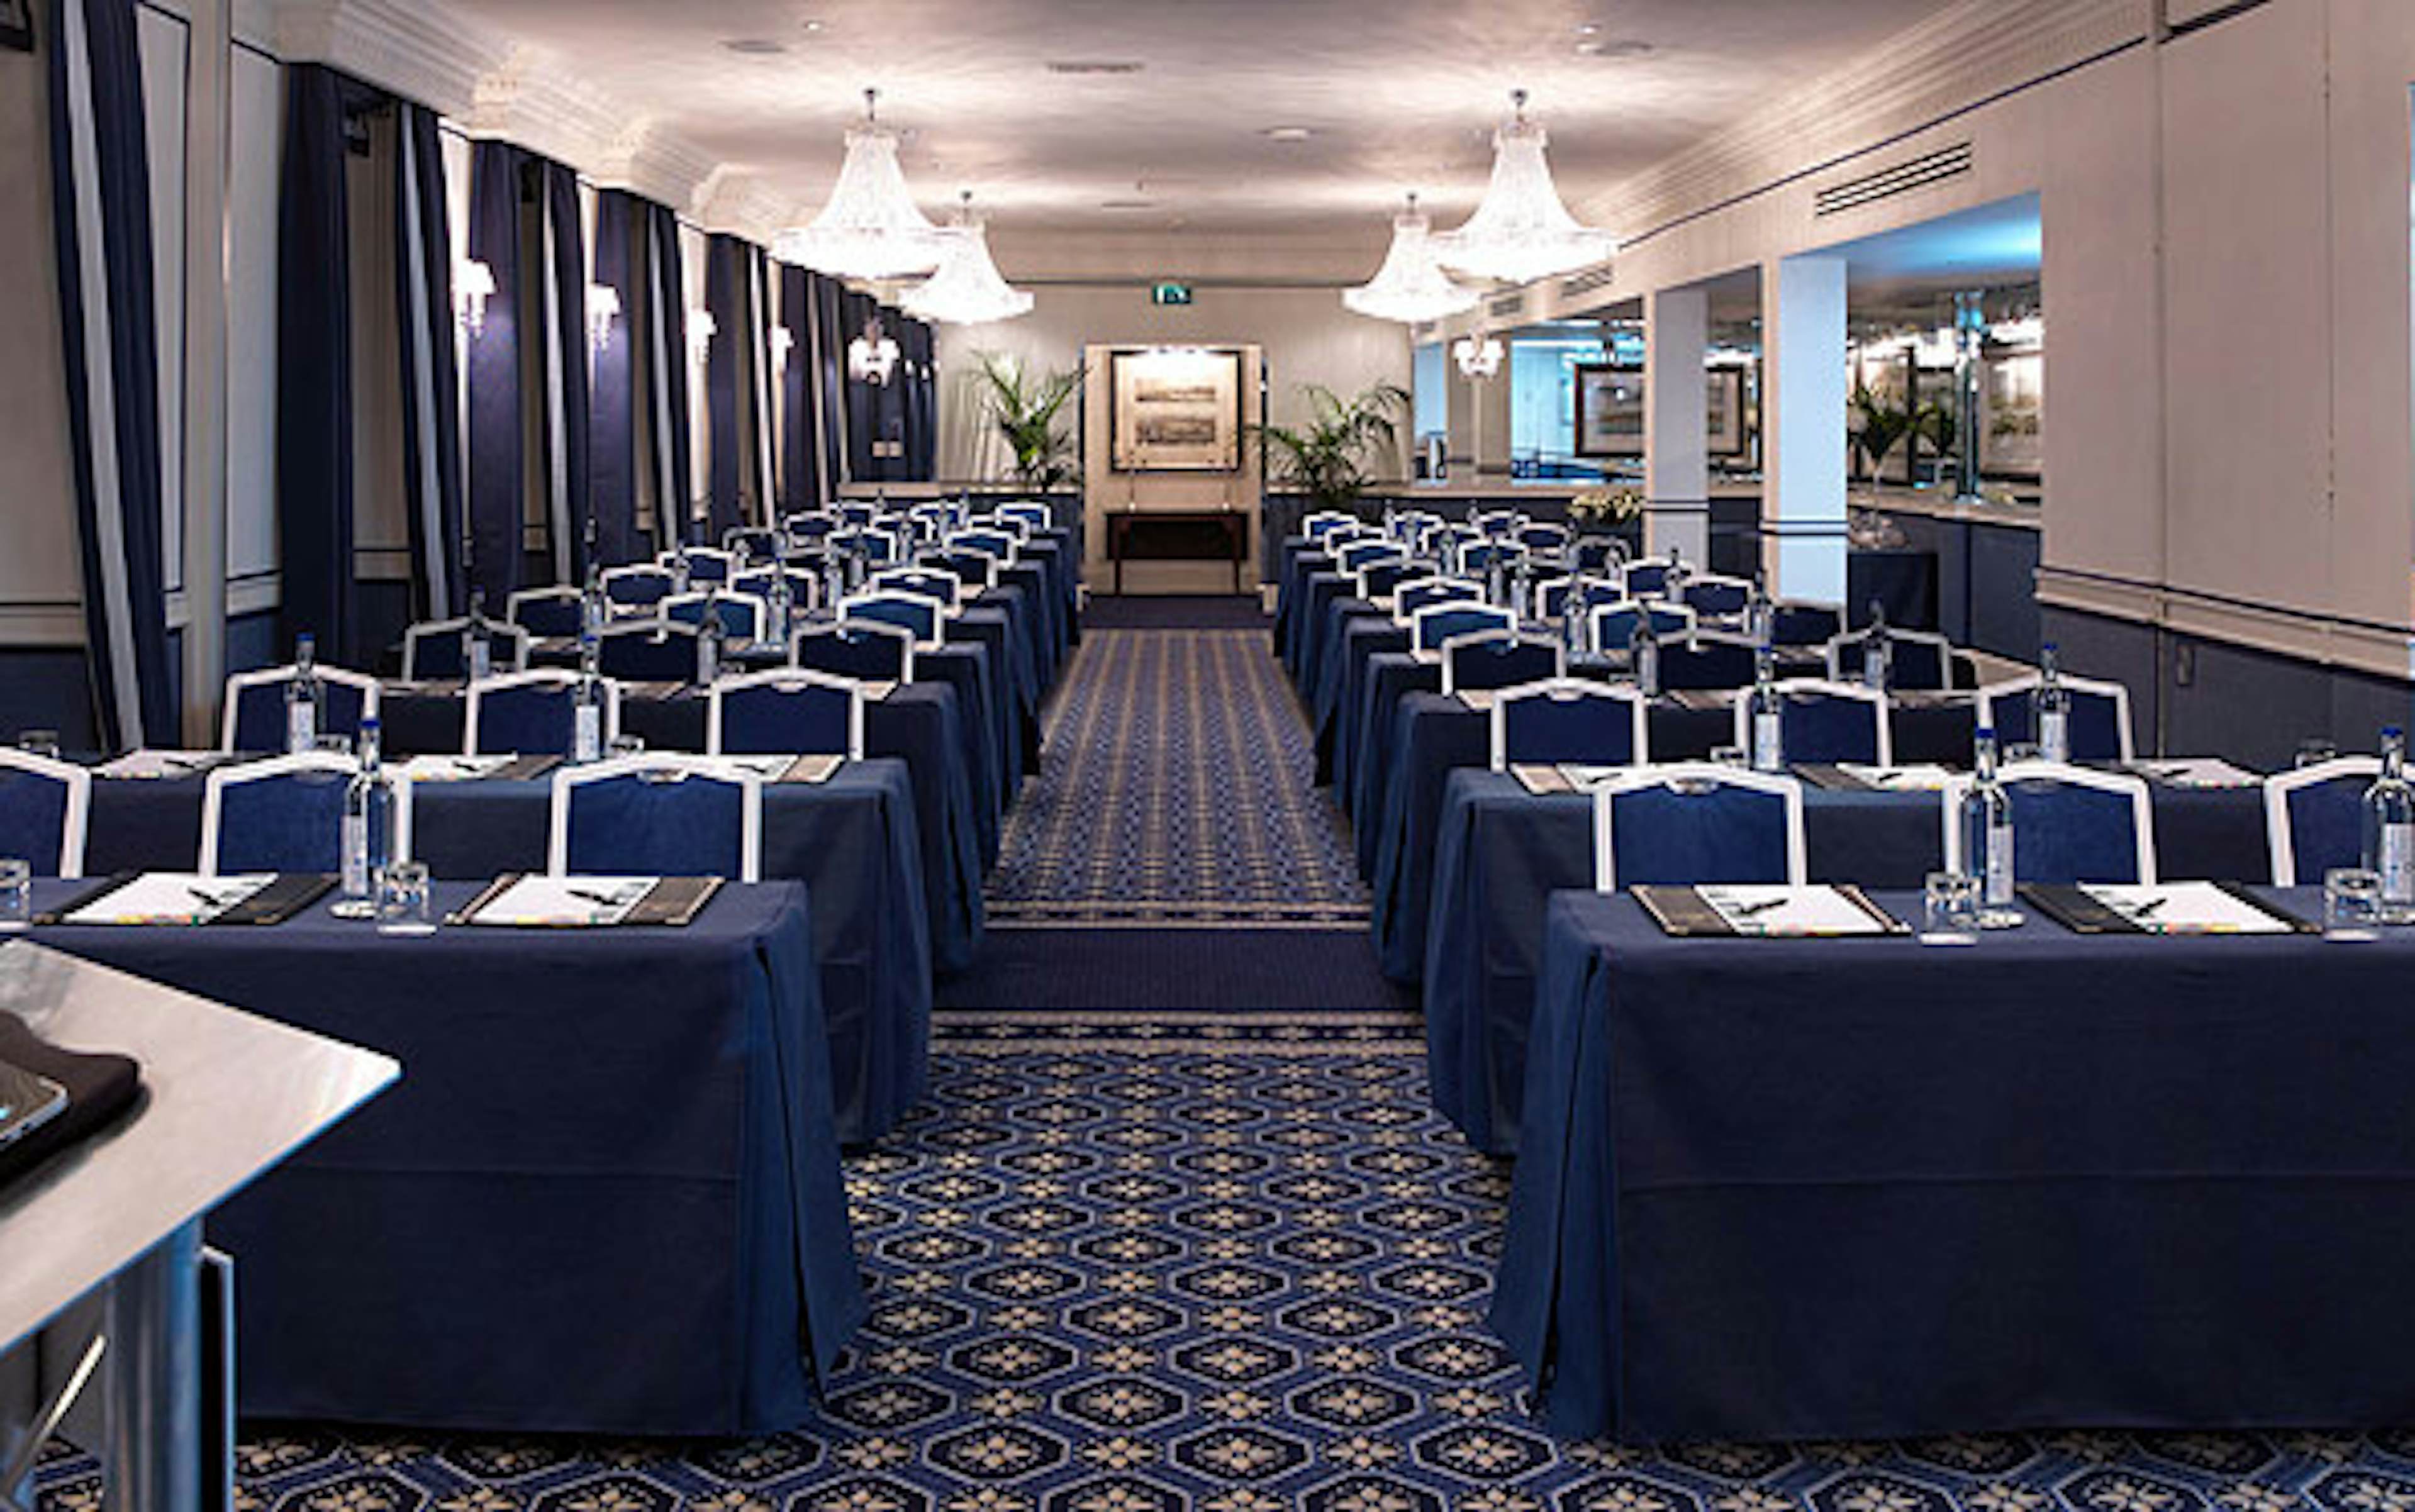 The Chesterfield Mayfair Hotel - image 1